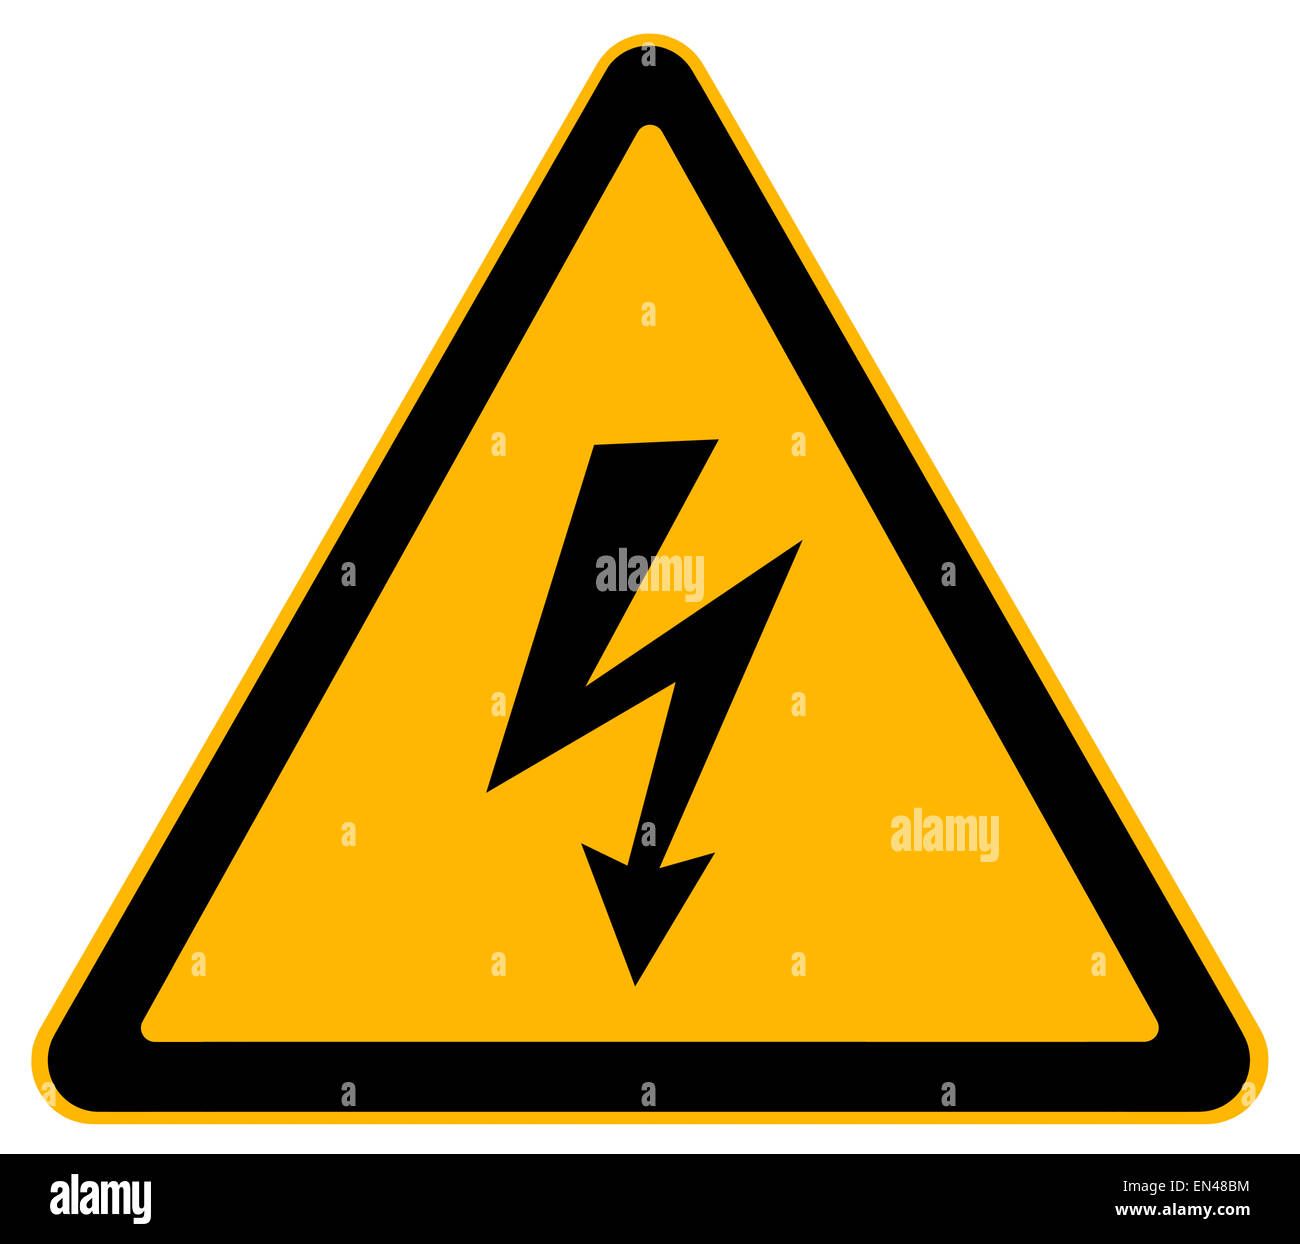 Yellow Triangle Electrical Shock Warning Sign Isolated on White Background. Stock Photo